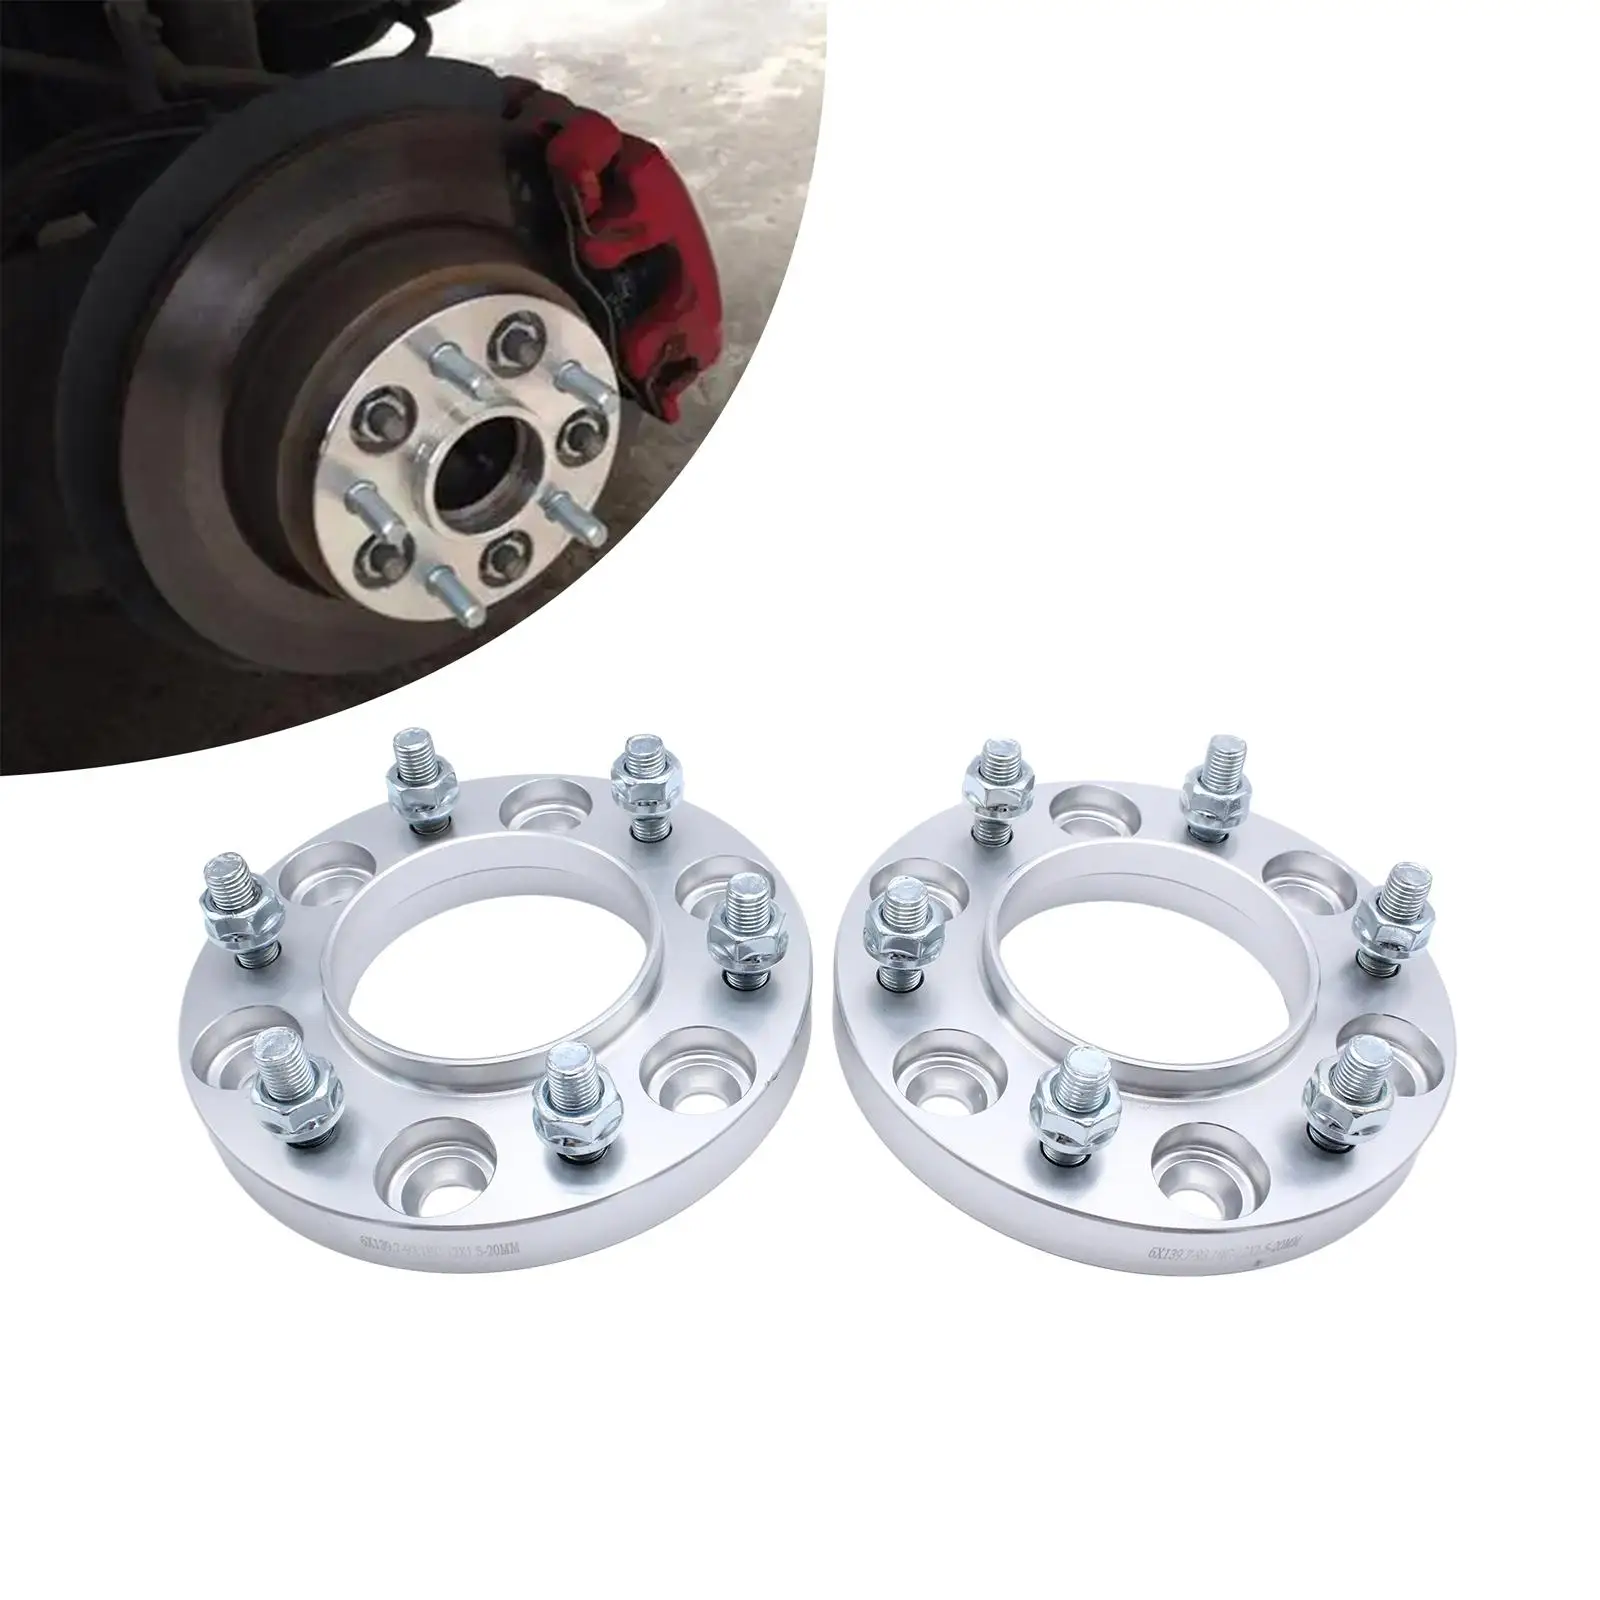 2x Wheel Spacers Durable with Bolts for Ranger Convenient Installation